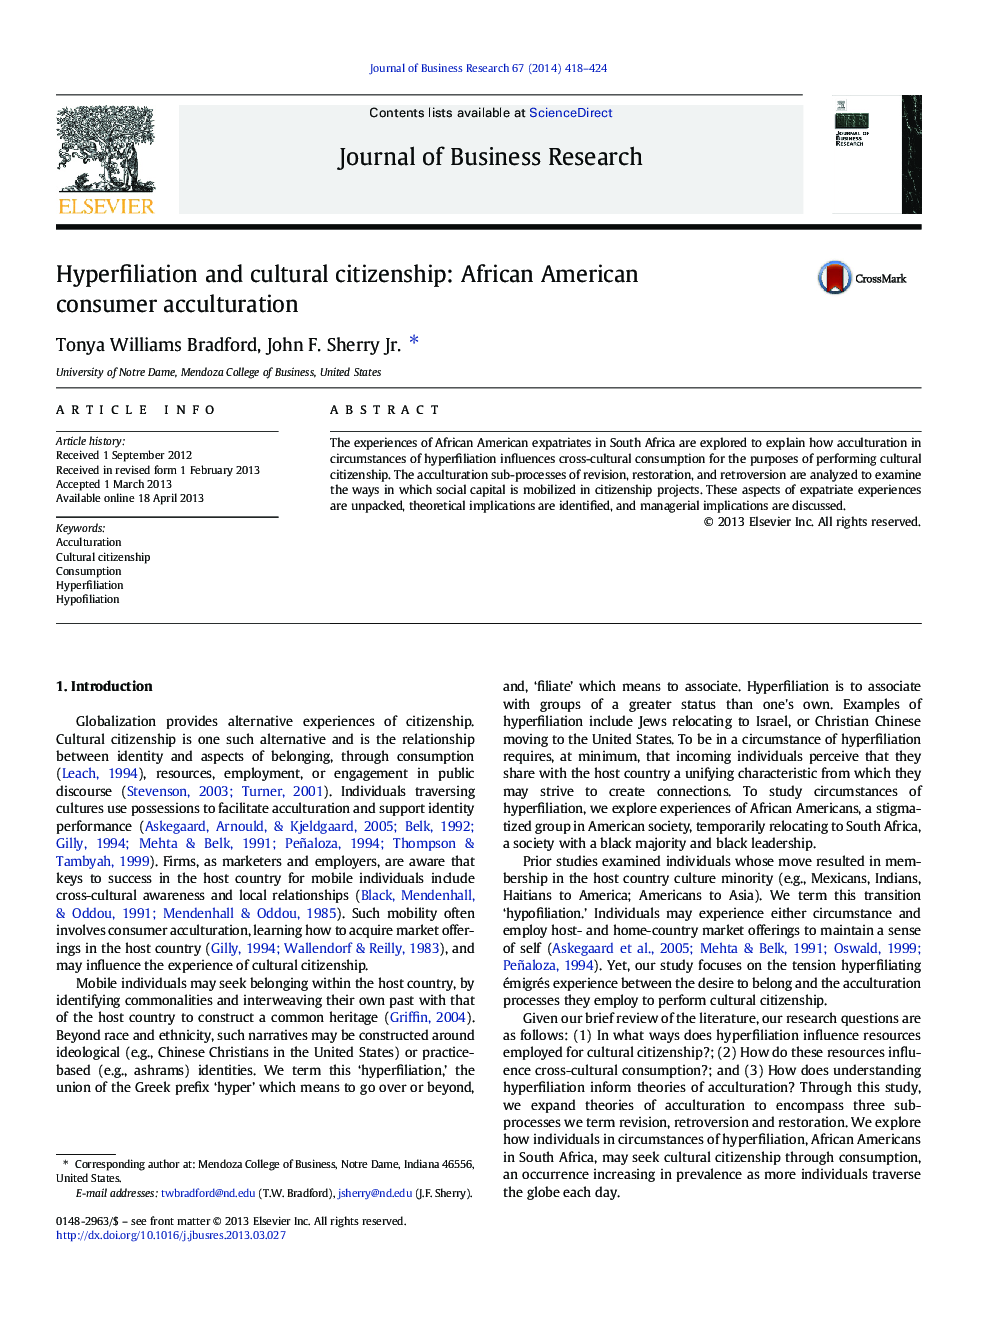 Hyperfiliation and cultural citizenship: African American consumer acculturation